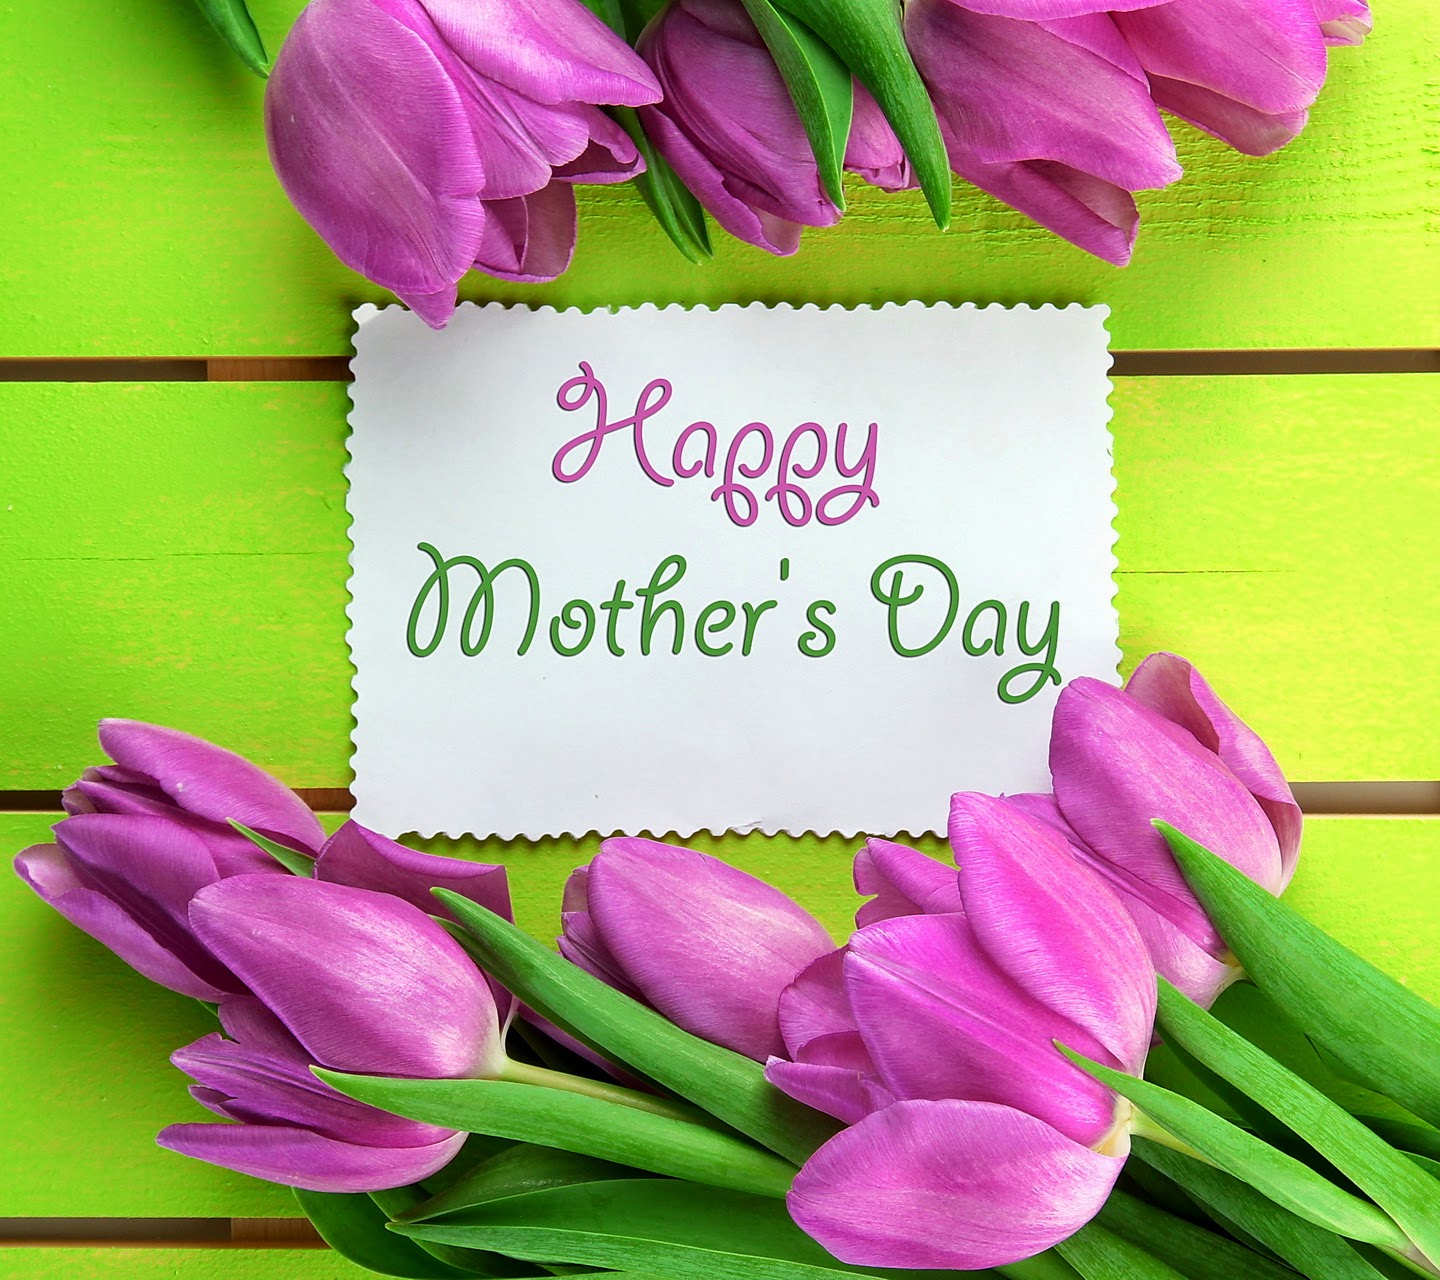 Mothers Day Wallpapers For Desktop Mobile Pc Backgrounds